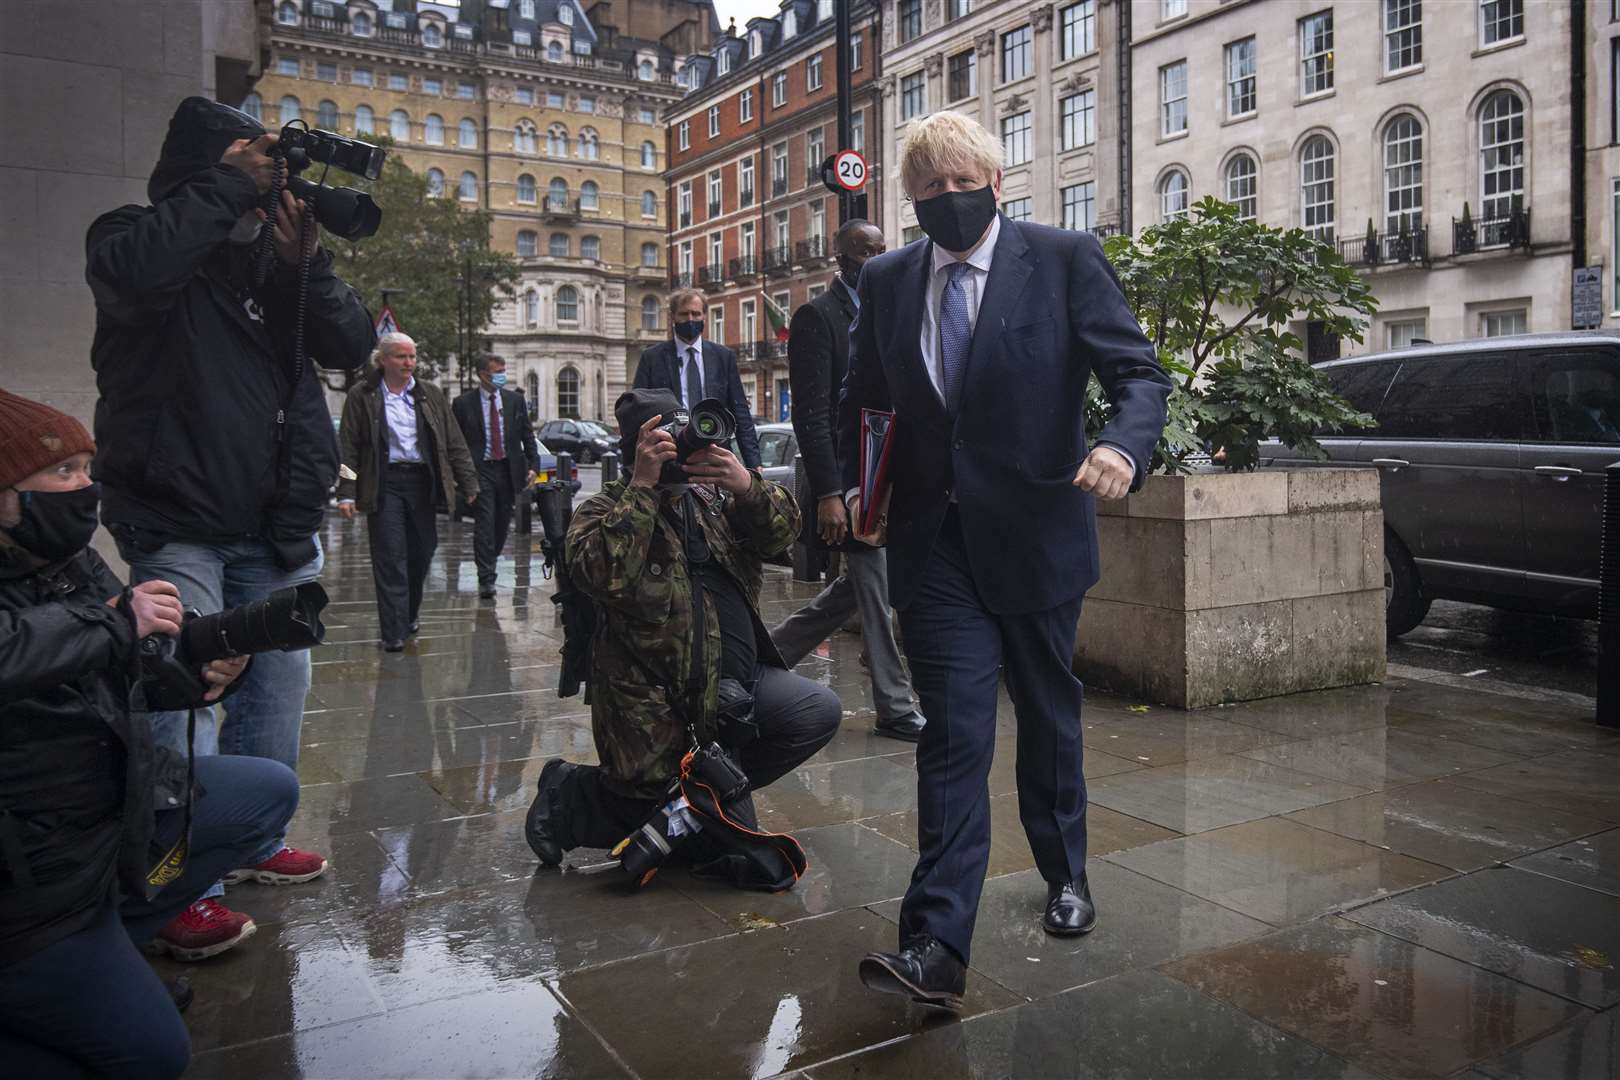 Prime Minister Boris Johnson warned of a ‘tough winter’ in an interview on Sunday (Victoria Jones/PA)